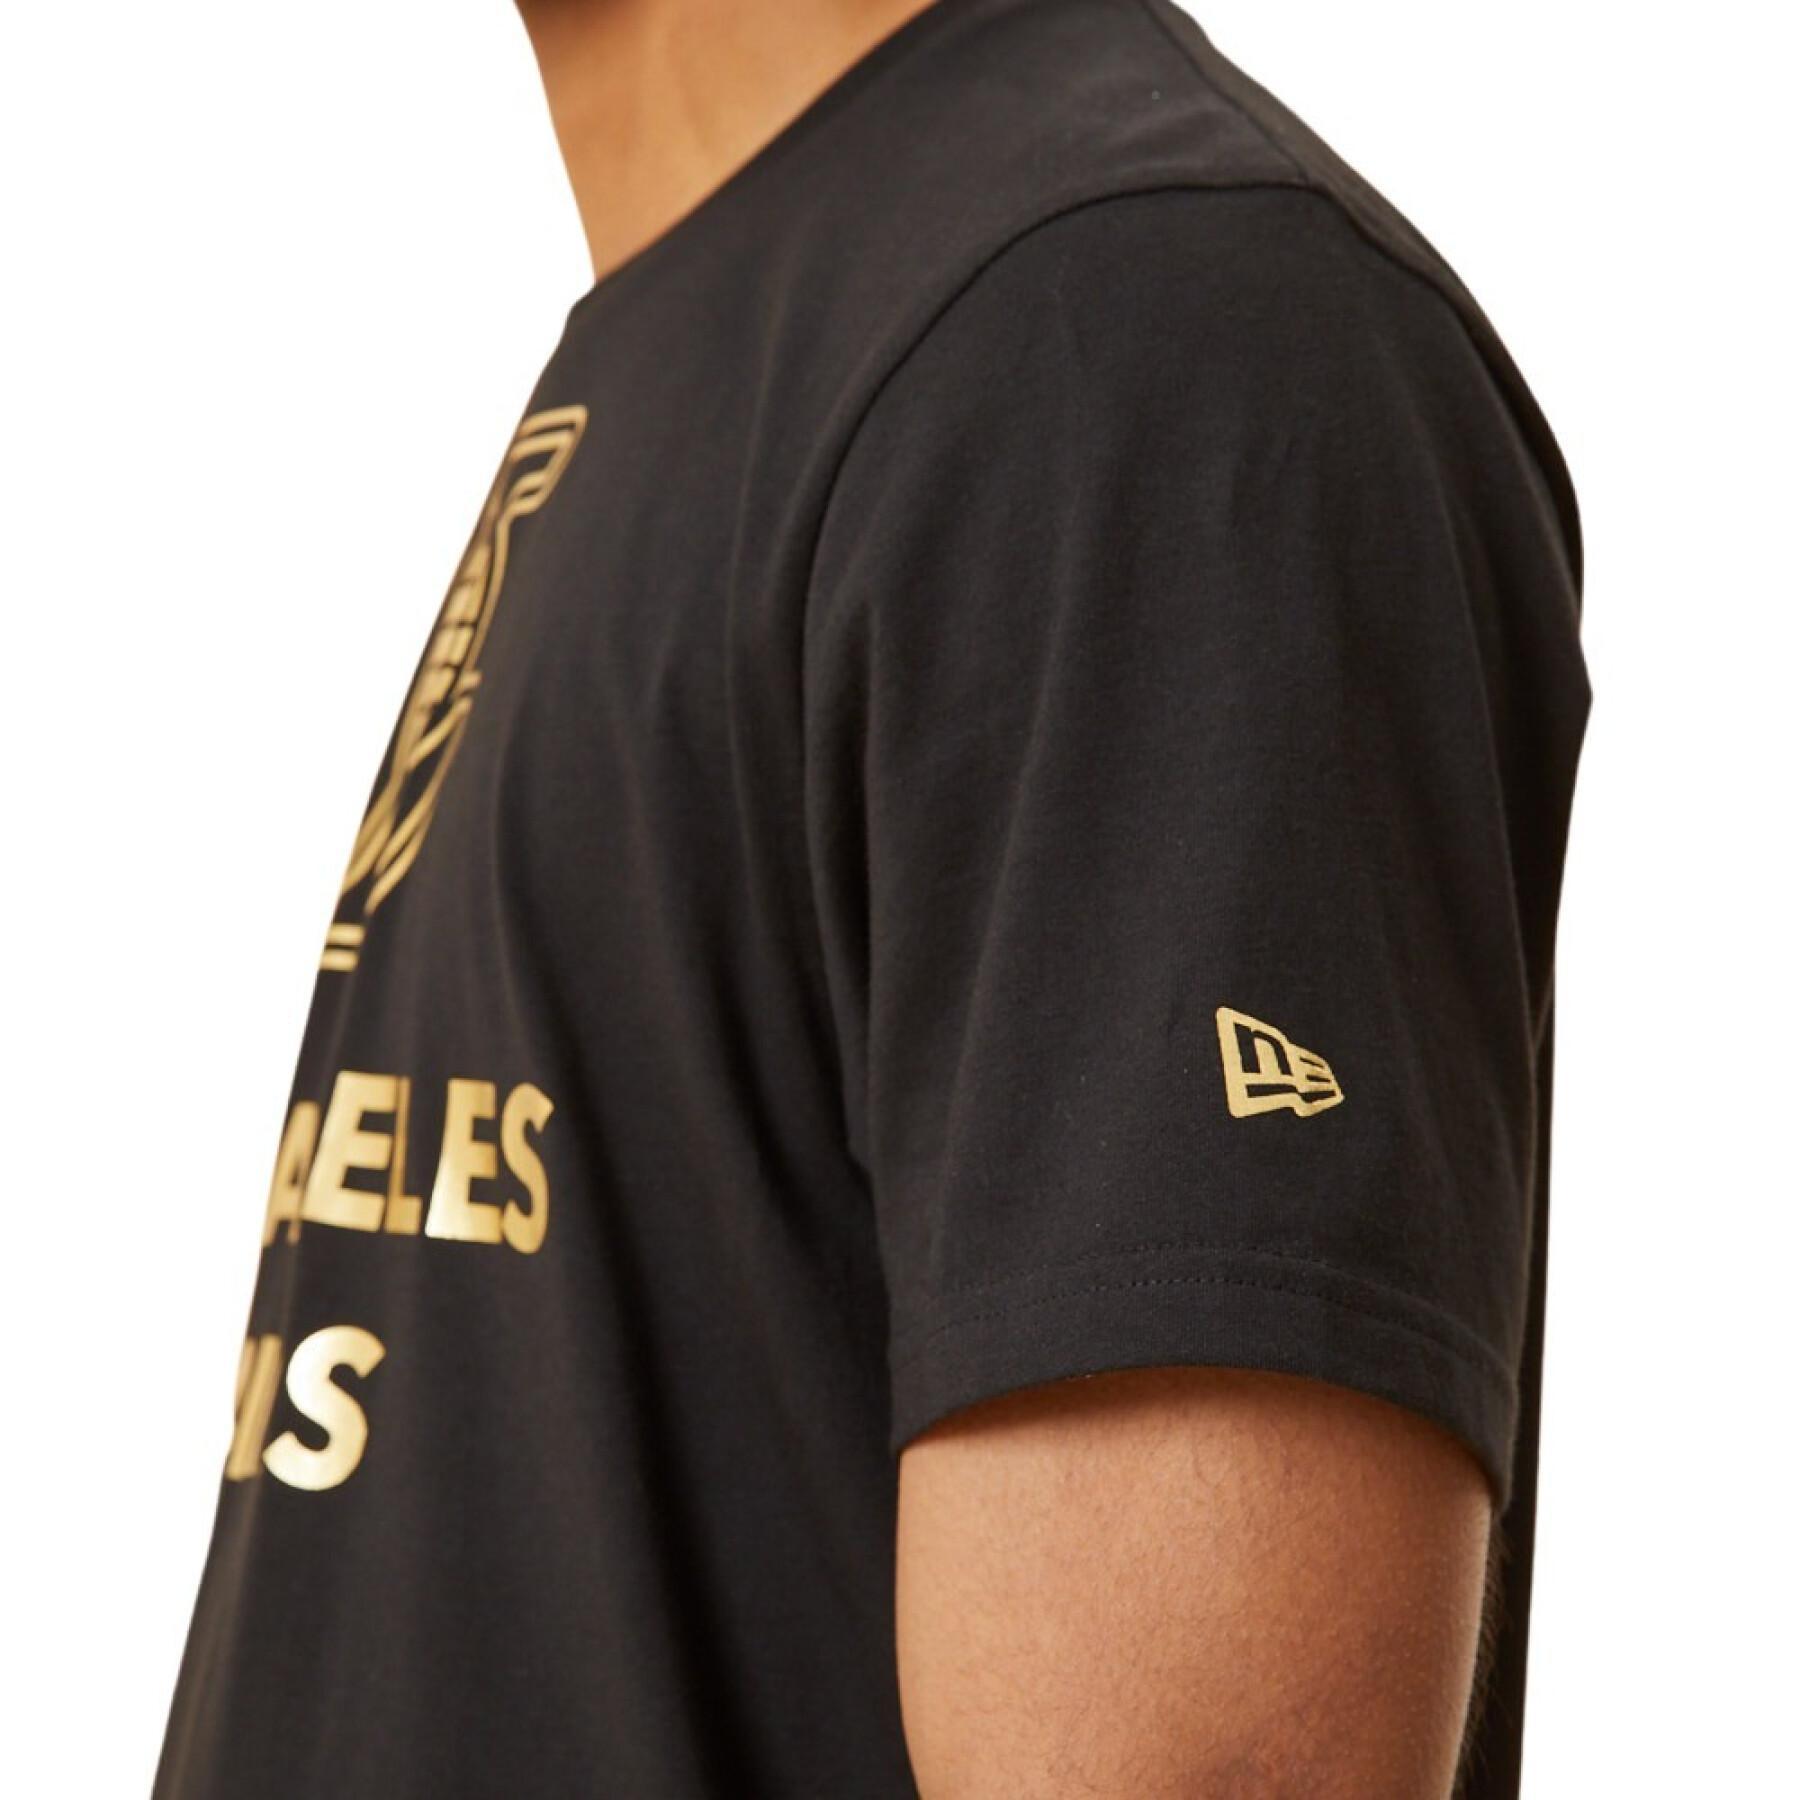 Camiseta Los Angeles Lakers Black And Gold